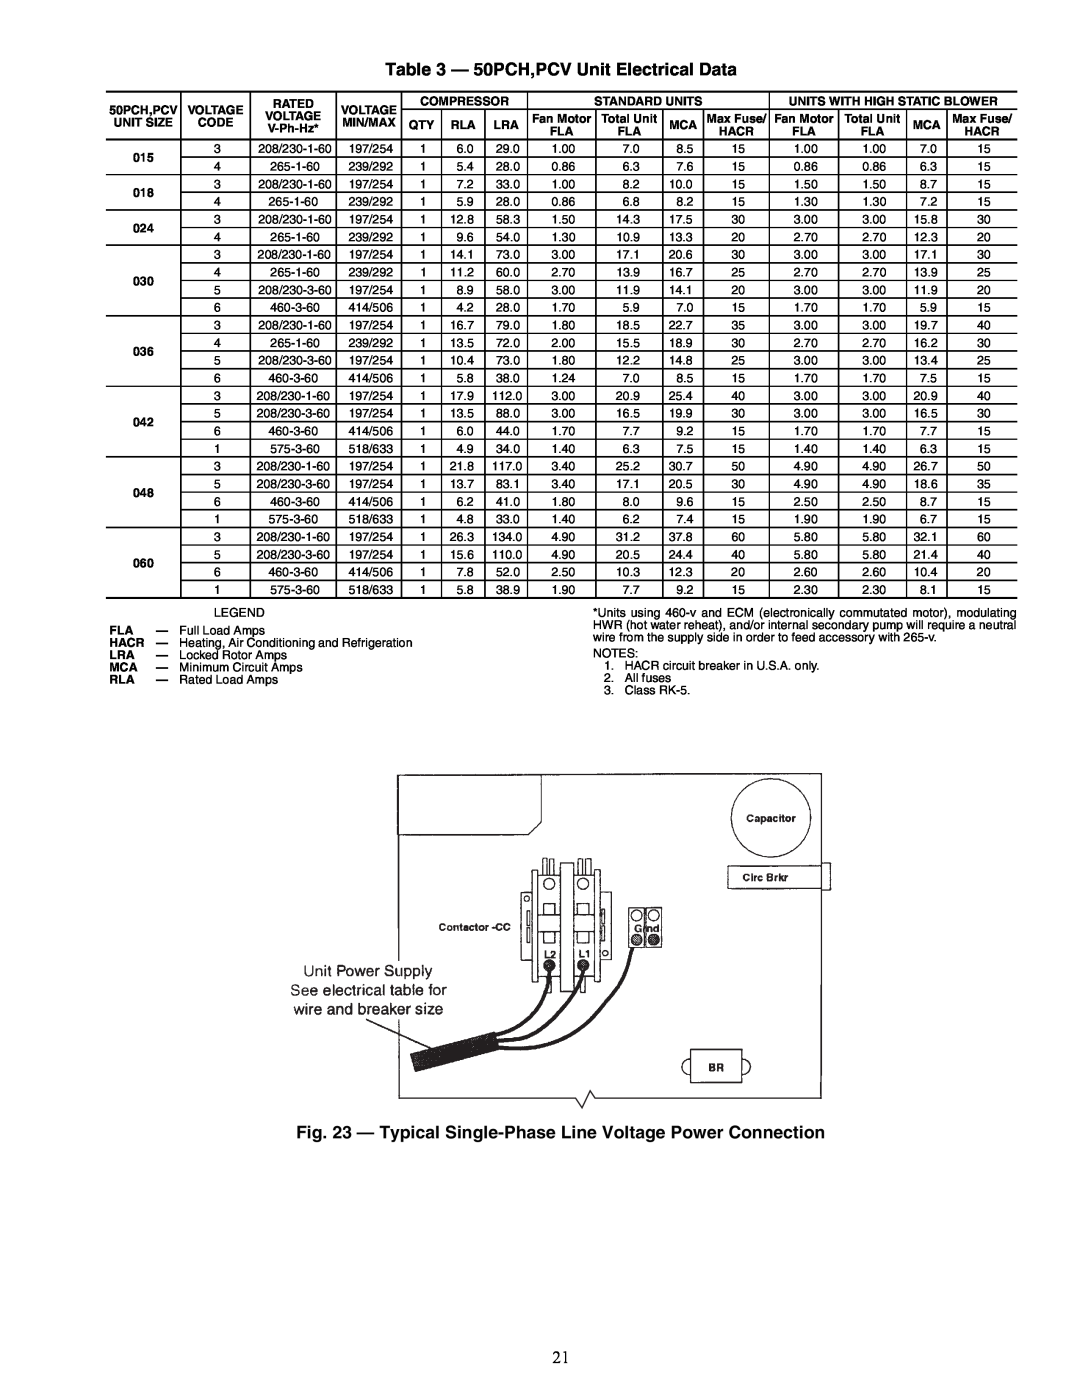 Carrier PCV015-060 specifications 50PCH,PCV Unit Electrical Data, a50-8162 